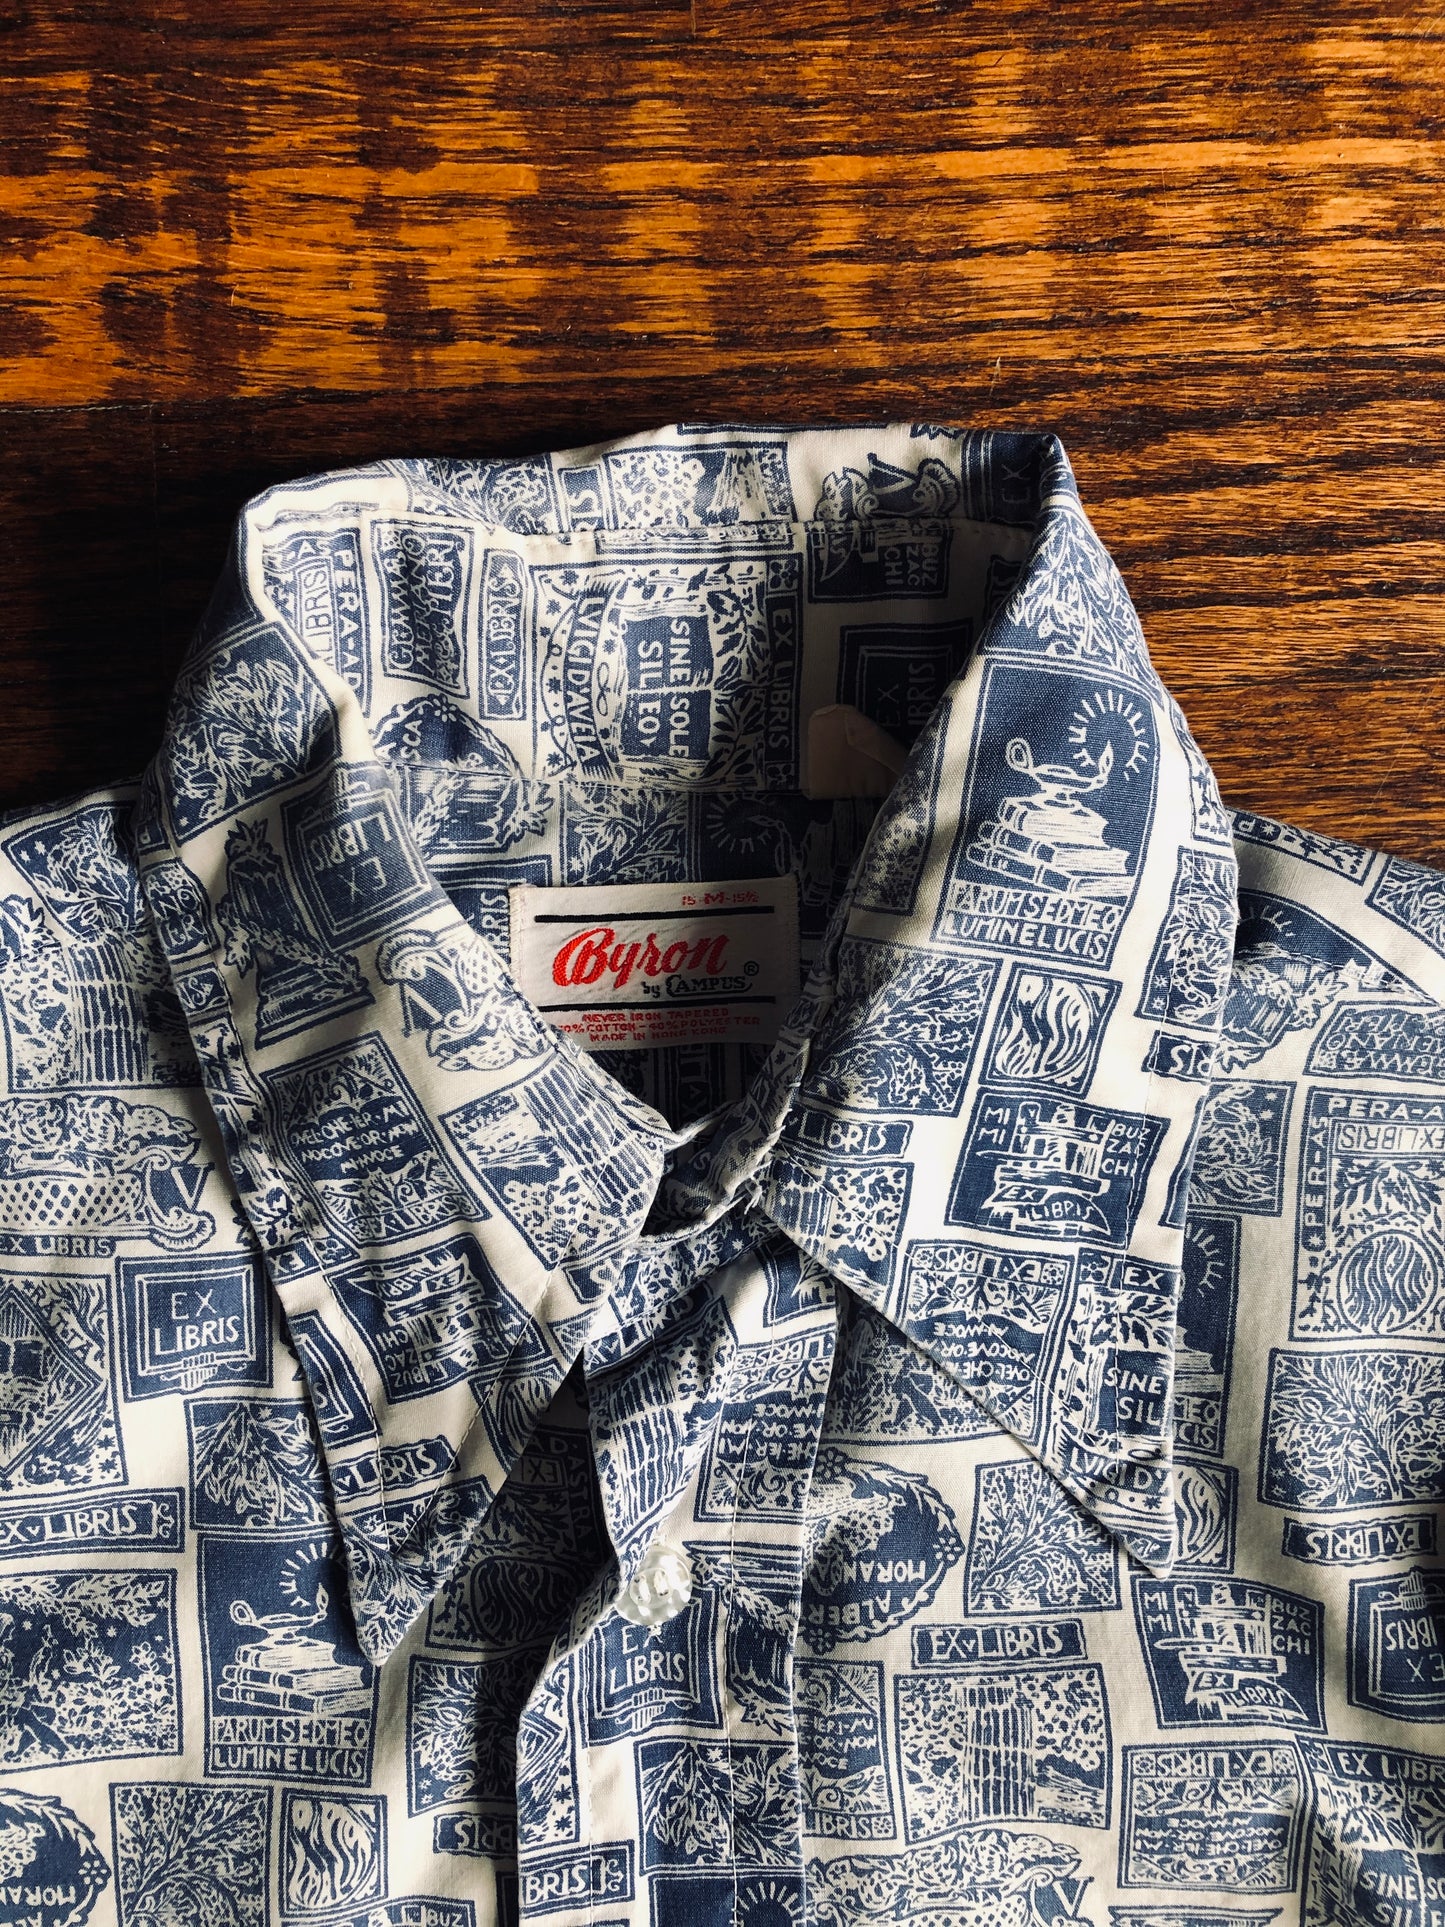 1970’s Byron by Campus Printed Shirt